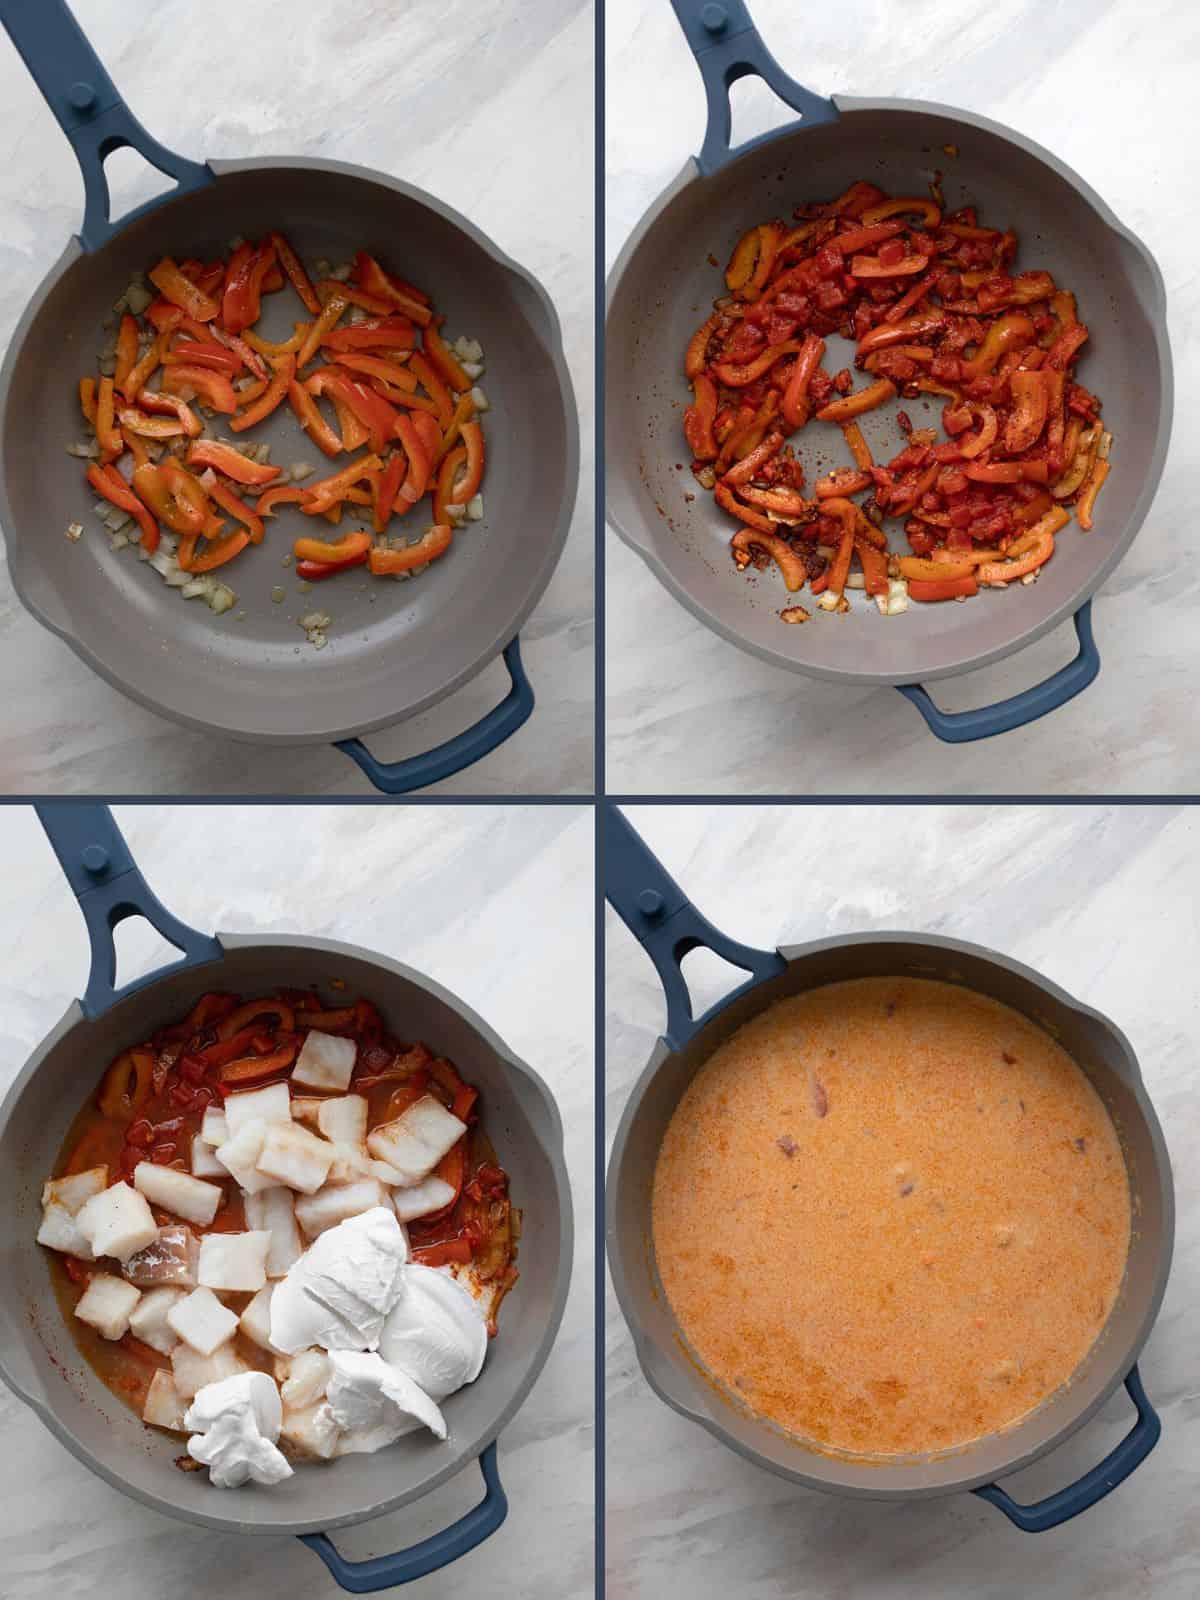 A collage of 4 images showing how to make Brazilian Fish Stew.